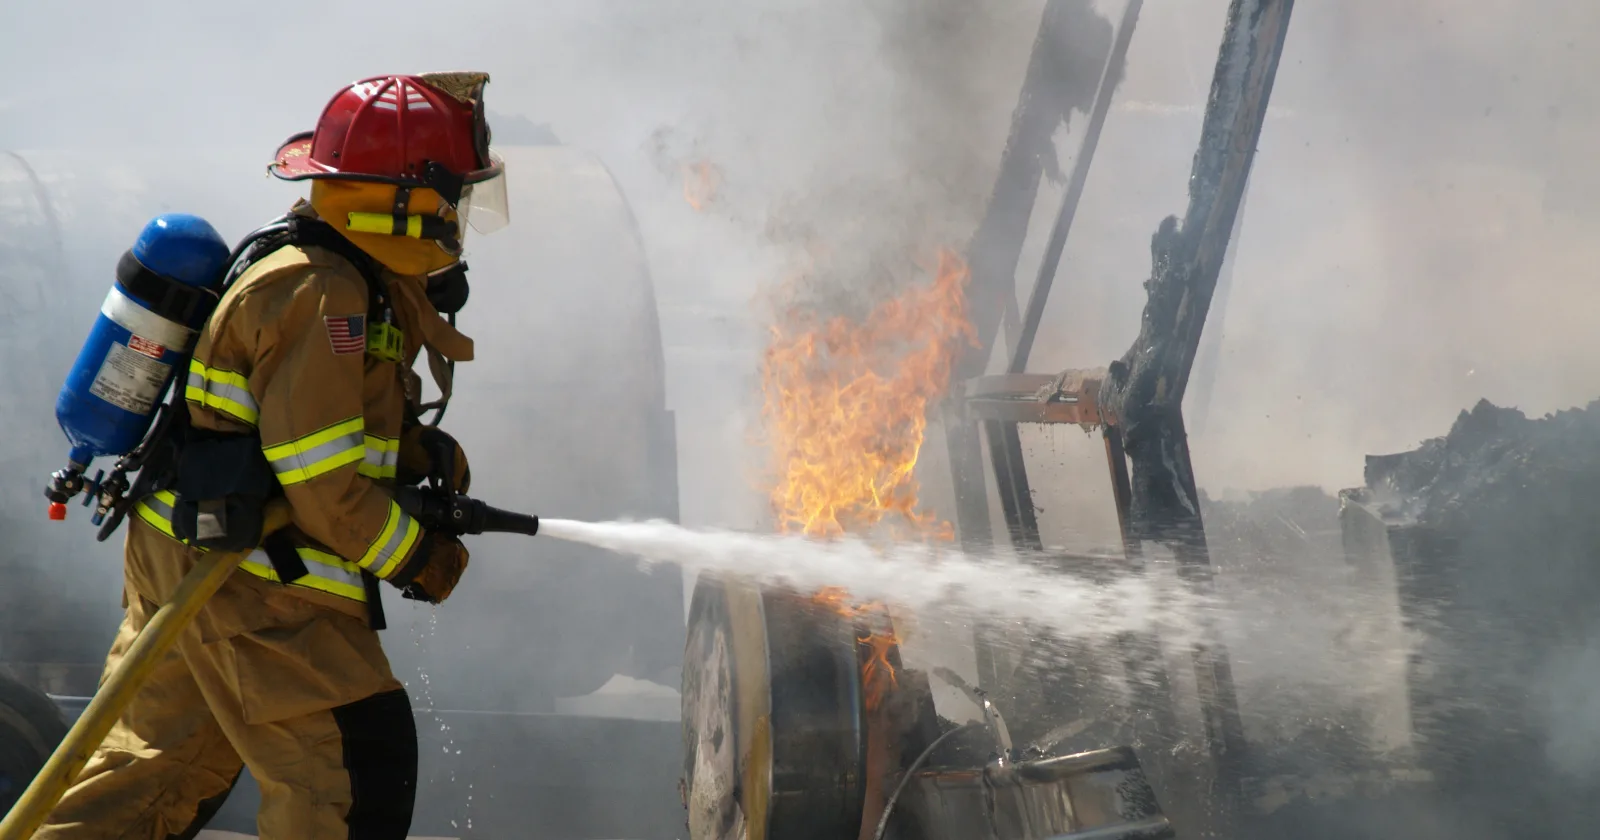 Shot of a firefighter putting out a burning RV